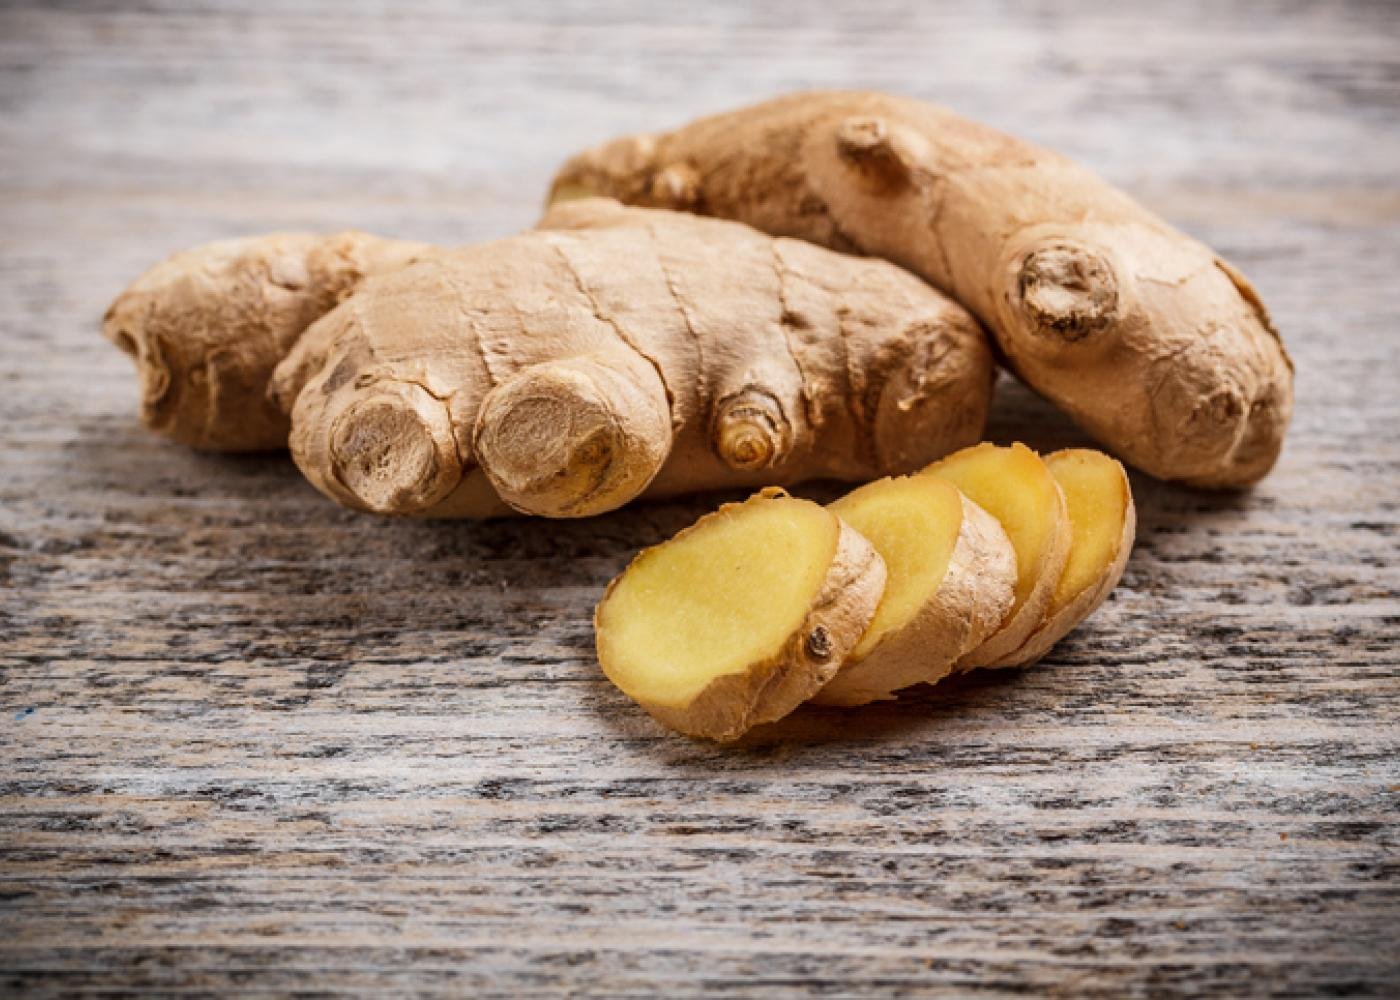 Edible ginger is so easy to grow at home